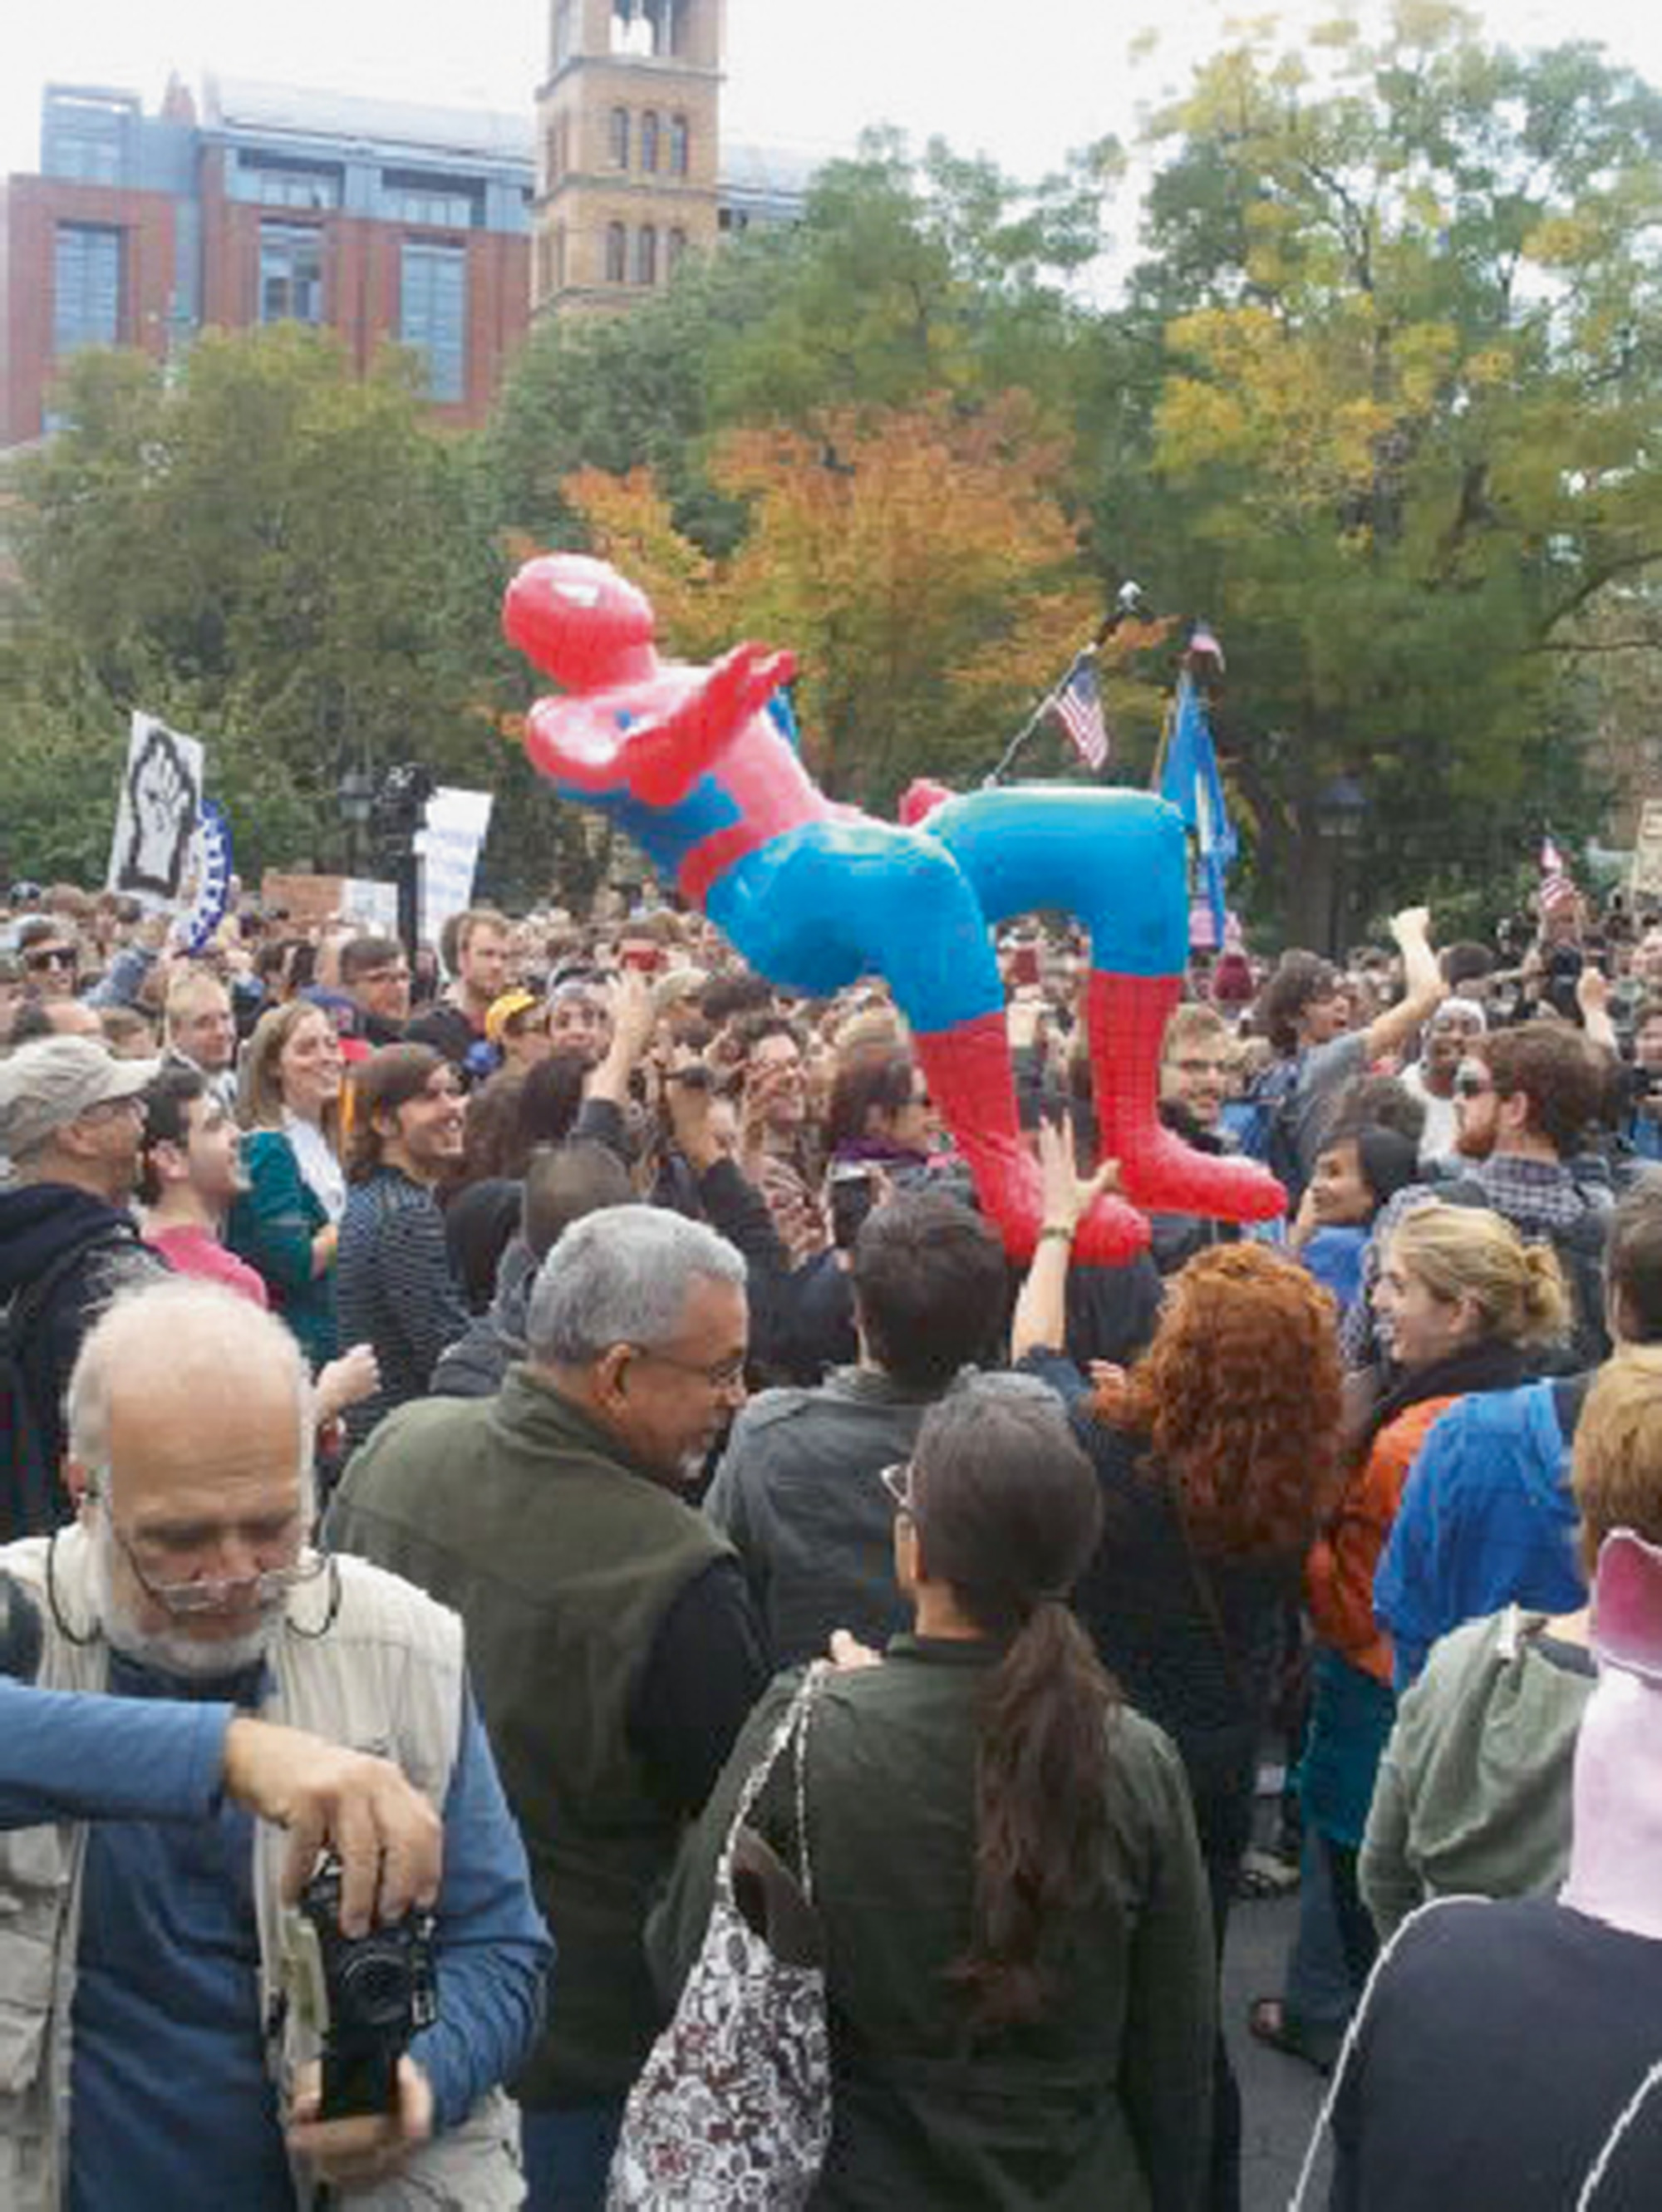 A twenty eleven photograph of an inflatable Spiderman at a protest.